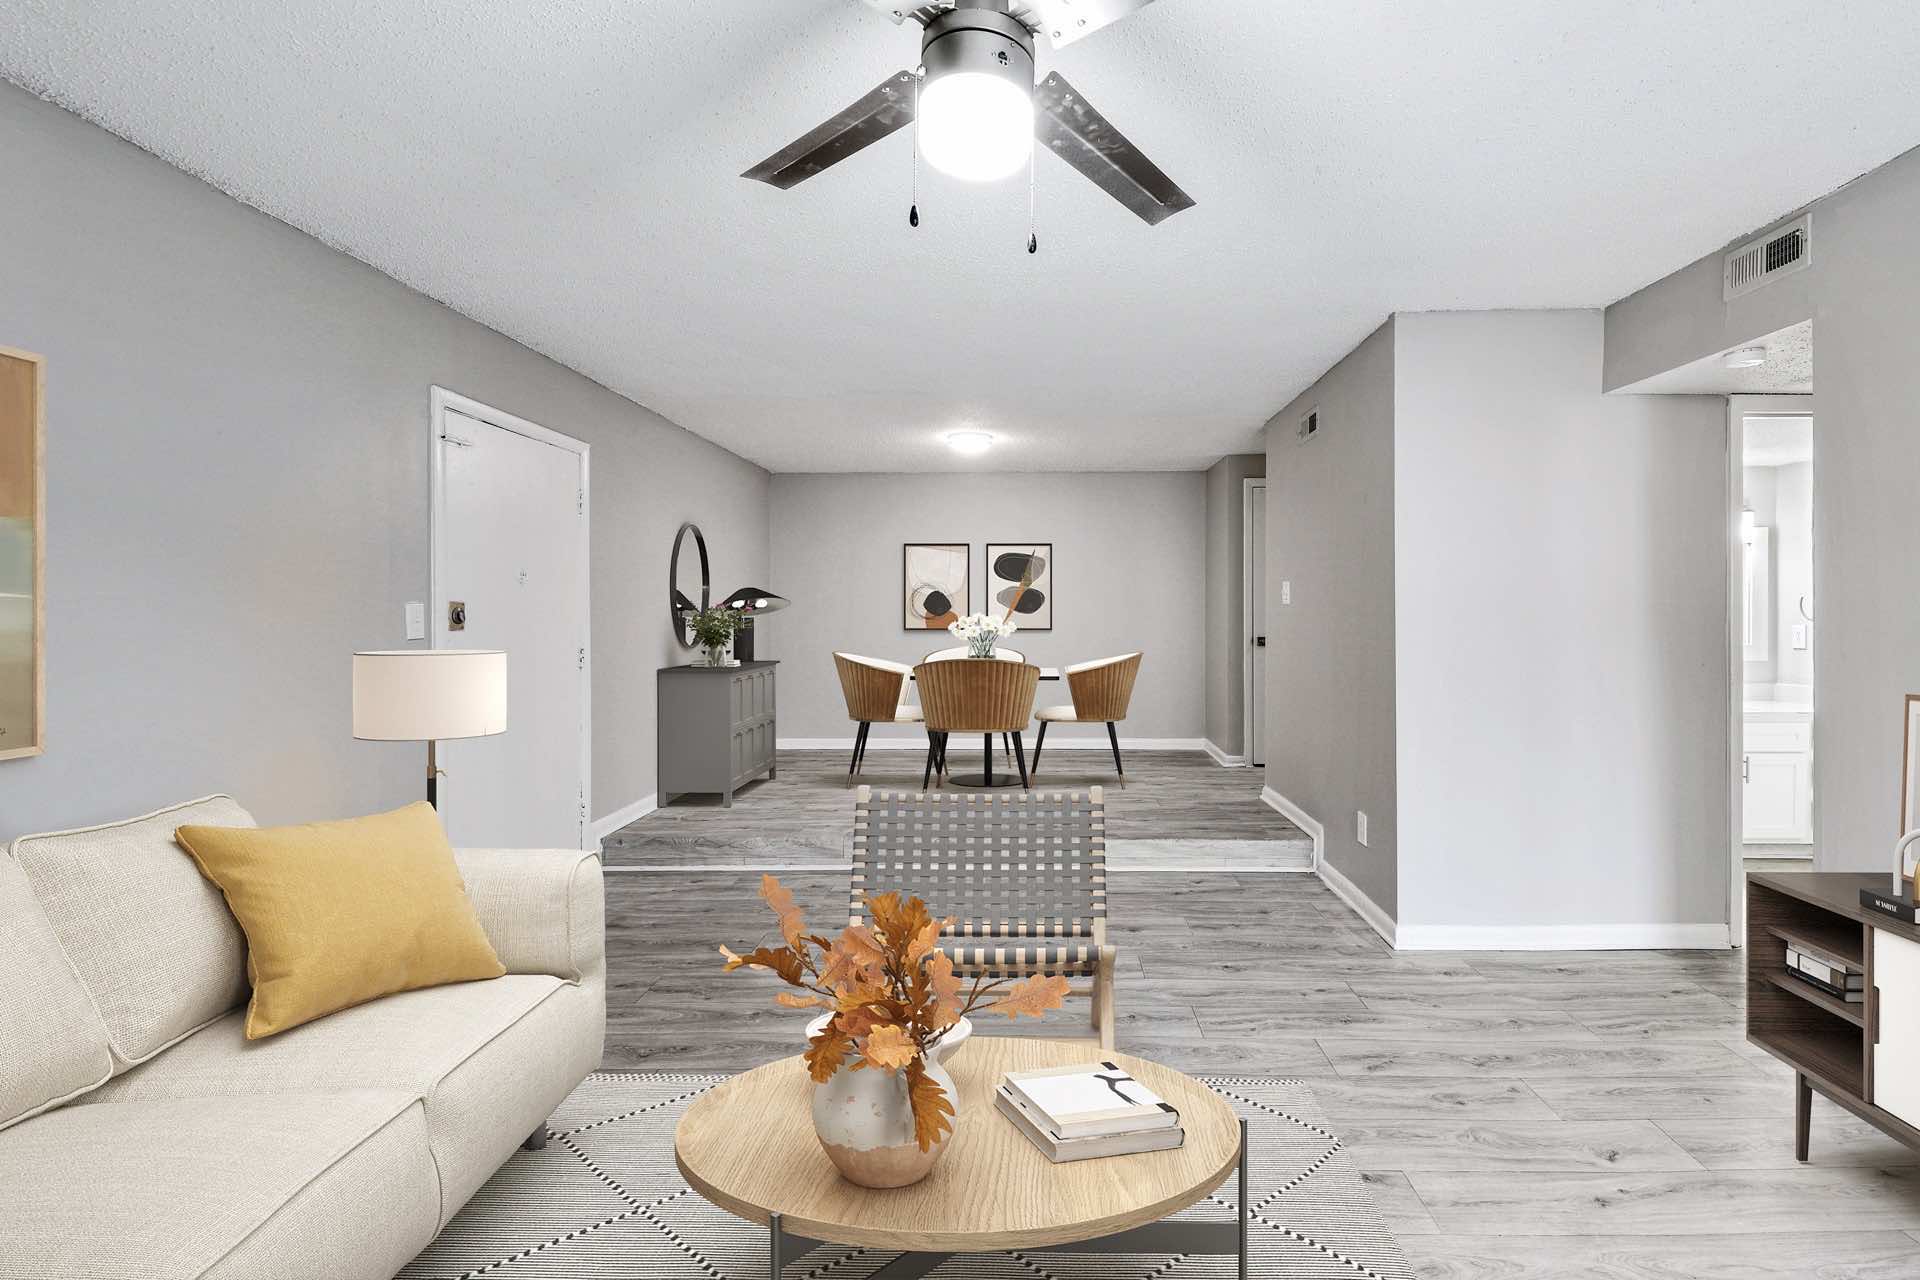 apartment open floor layout showing living room with ceiling fan and dining room in background